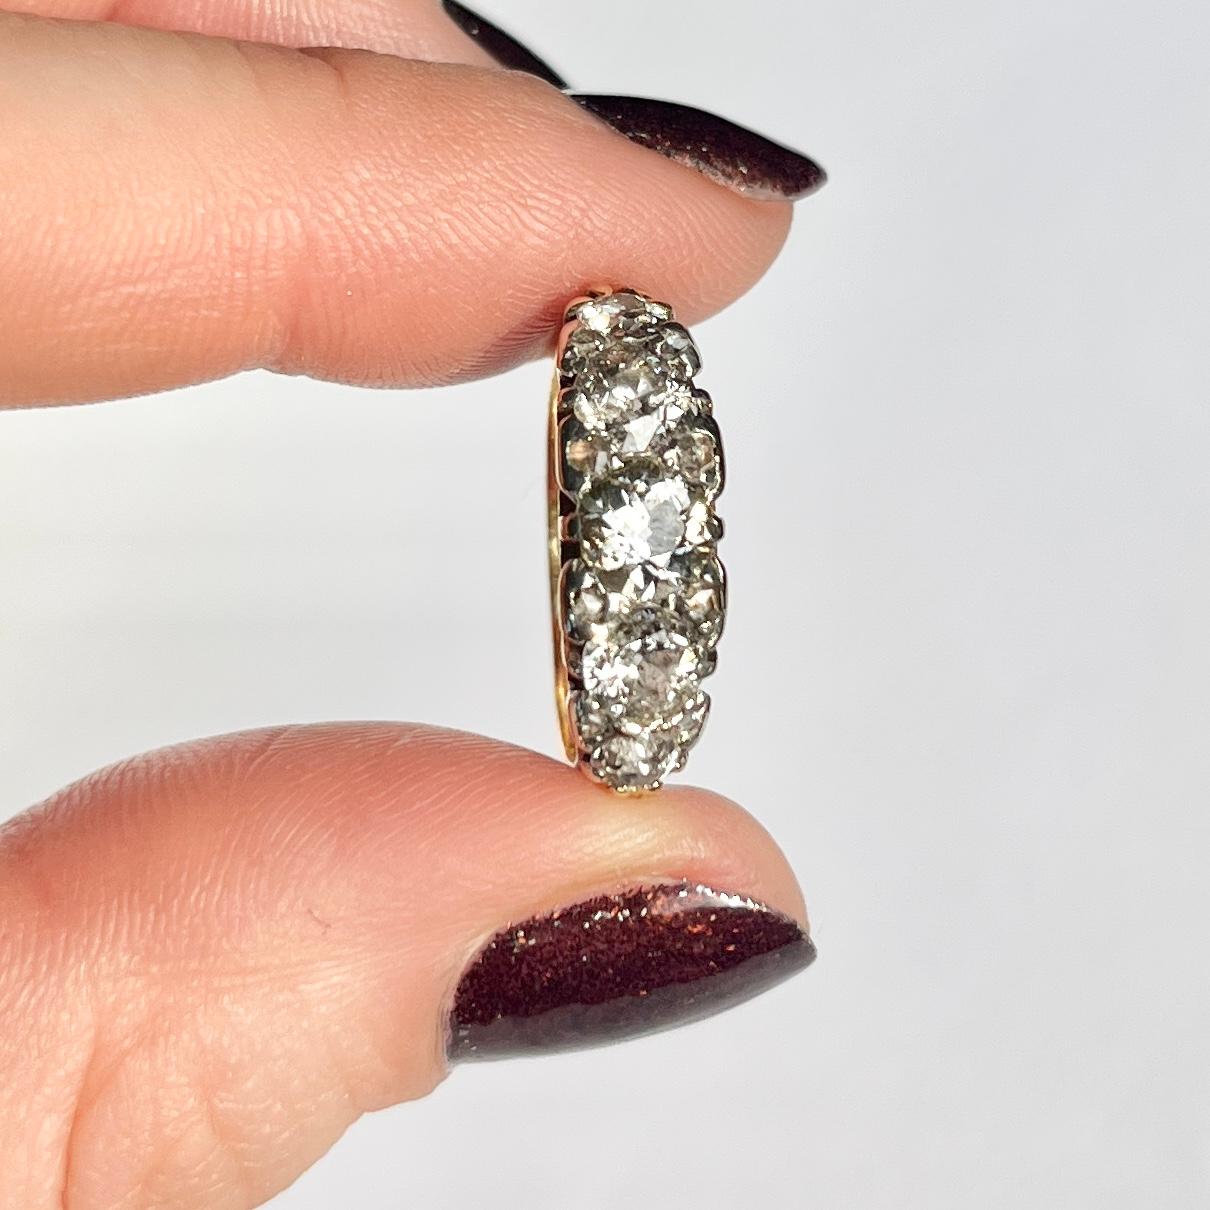 Five glistening diamonds sit fabulously within a decorative scroll setting modelled in 18ct gold. The central stone measures 50pts, the next size measure 35pts each and the smallest stones measure 10pts each. Either side of each diamond are pairs of